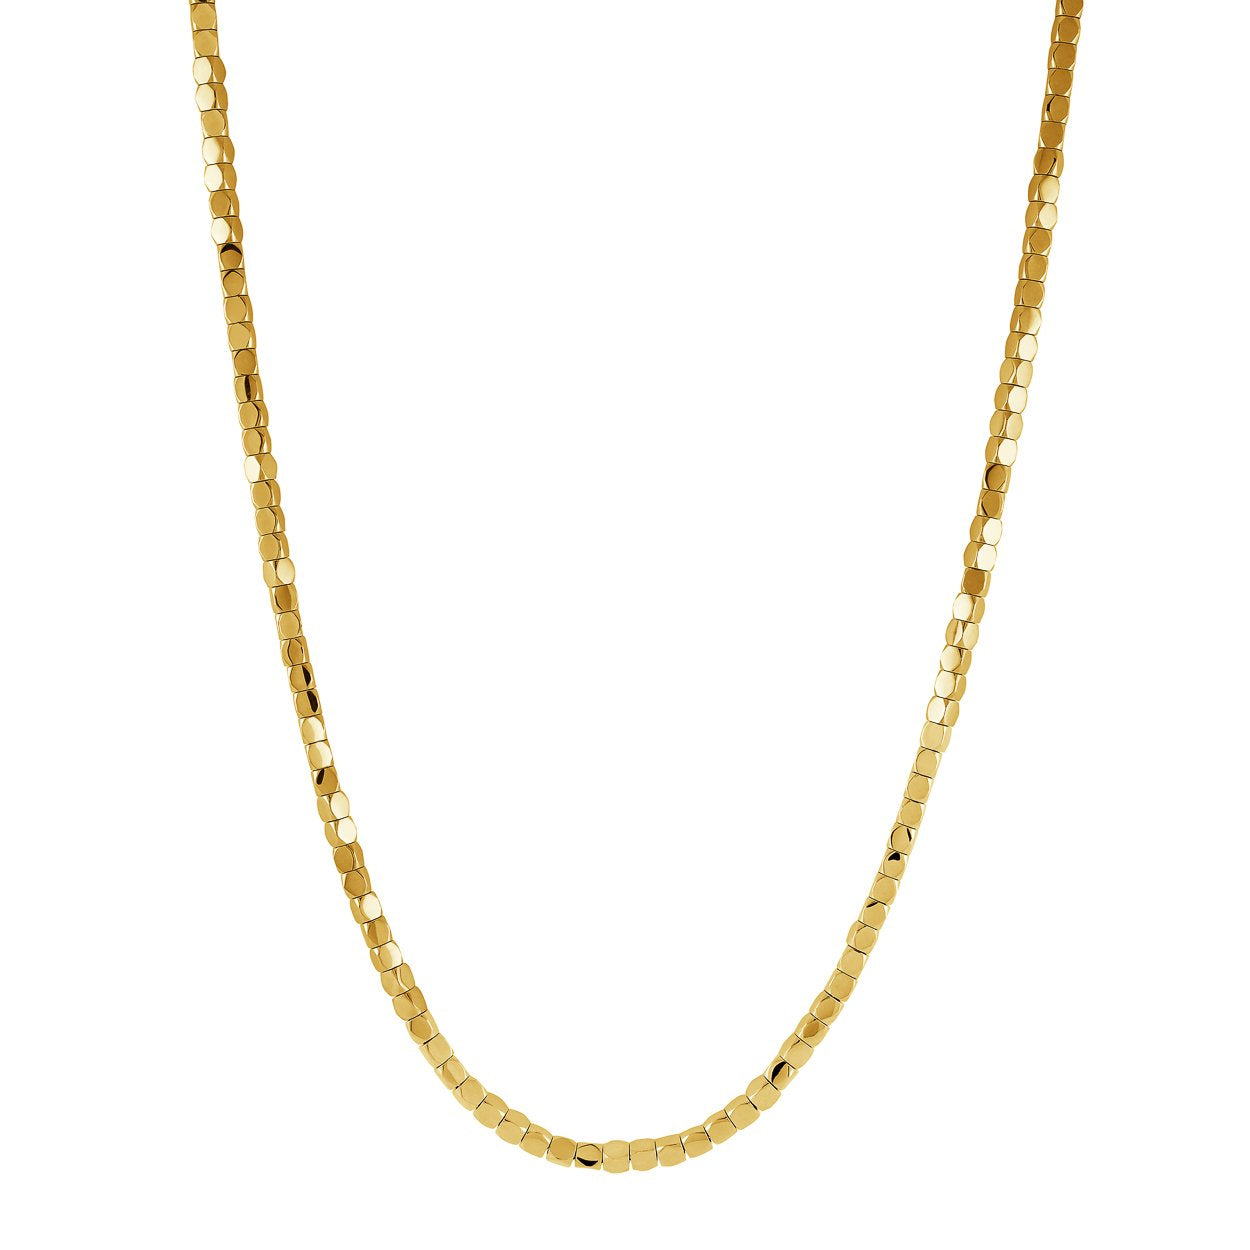 GOLD-IP-S.STEEL POLISHED 3.3MM-CUBIC-BEADS 16''+3'' NECKLACE